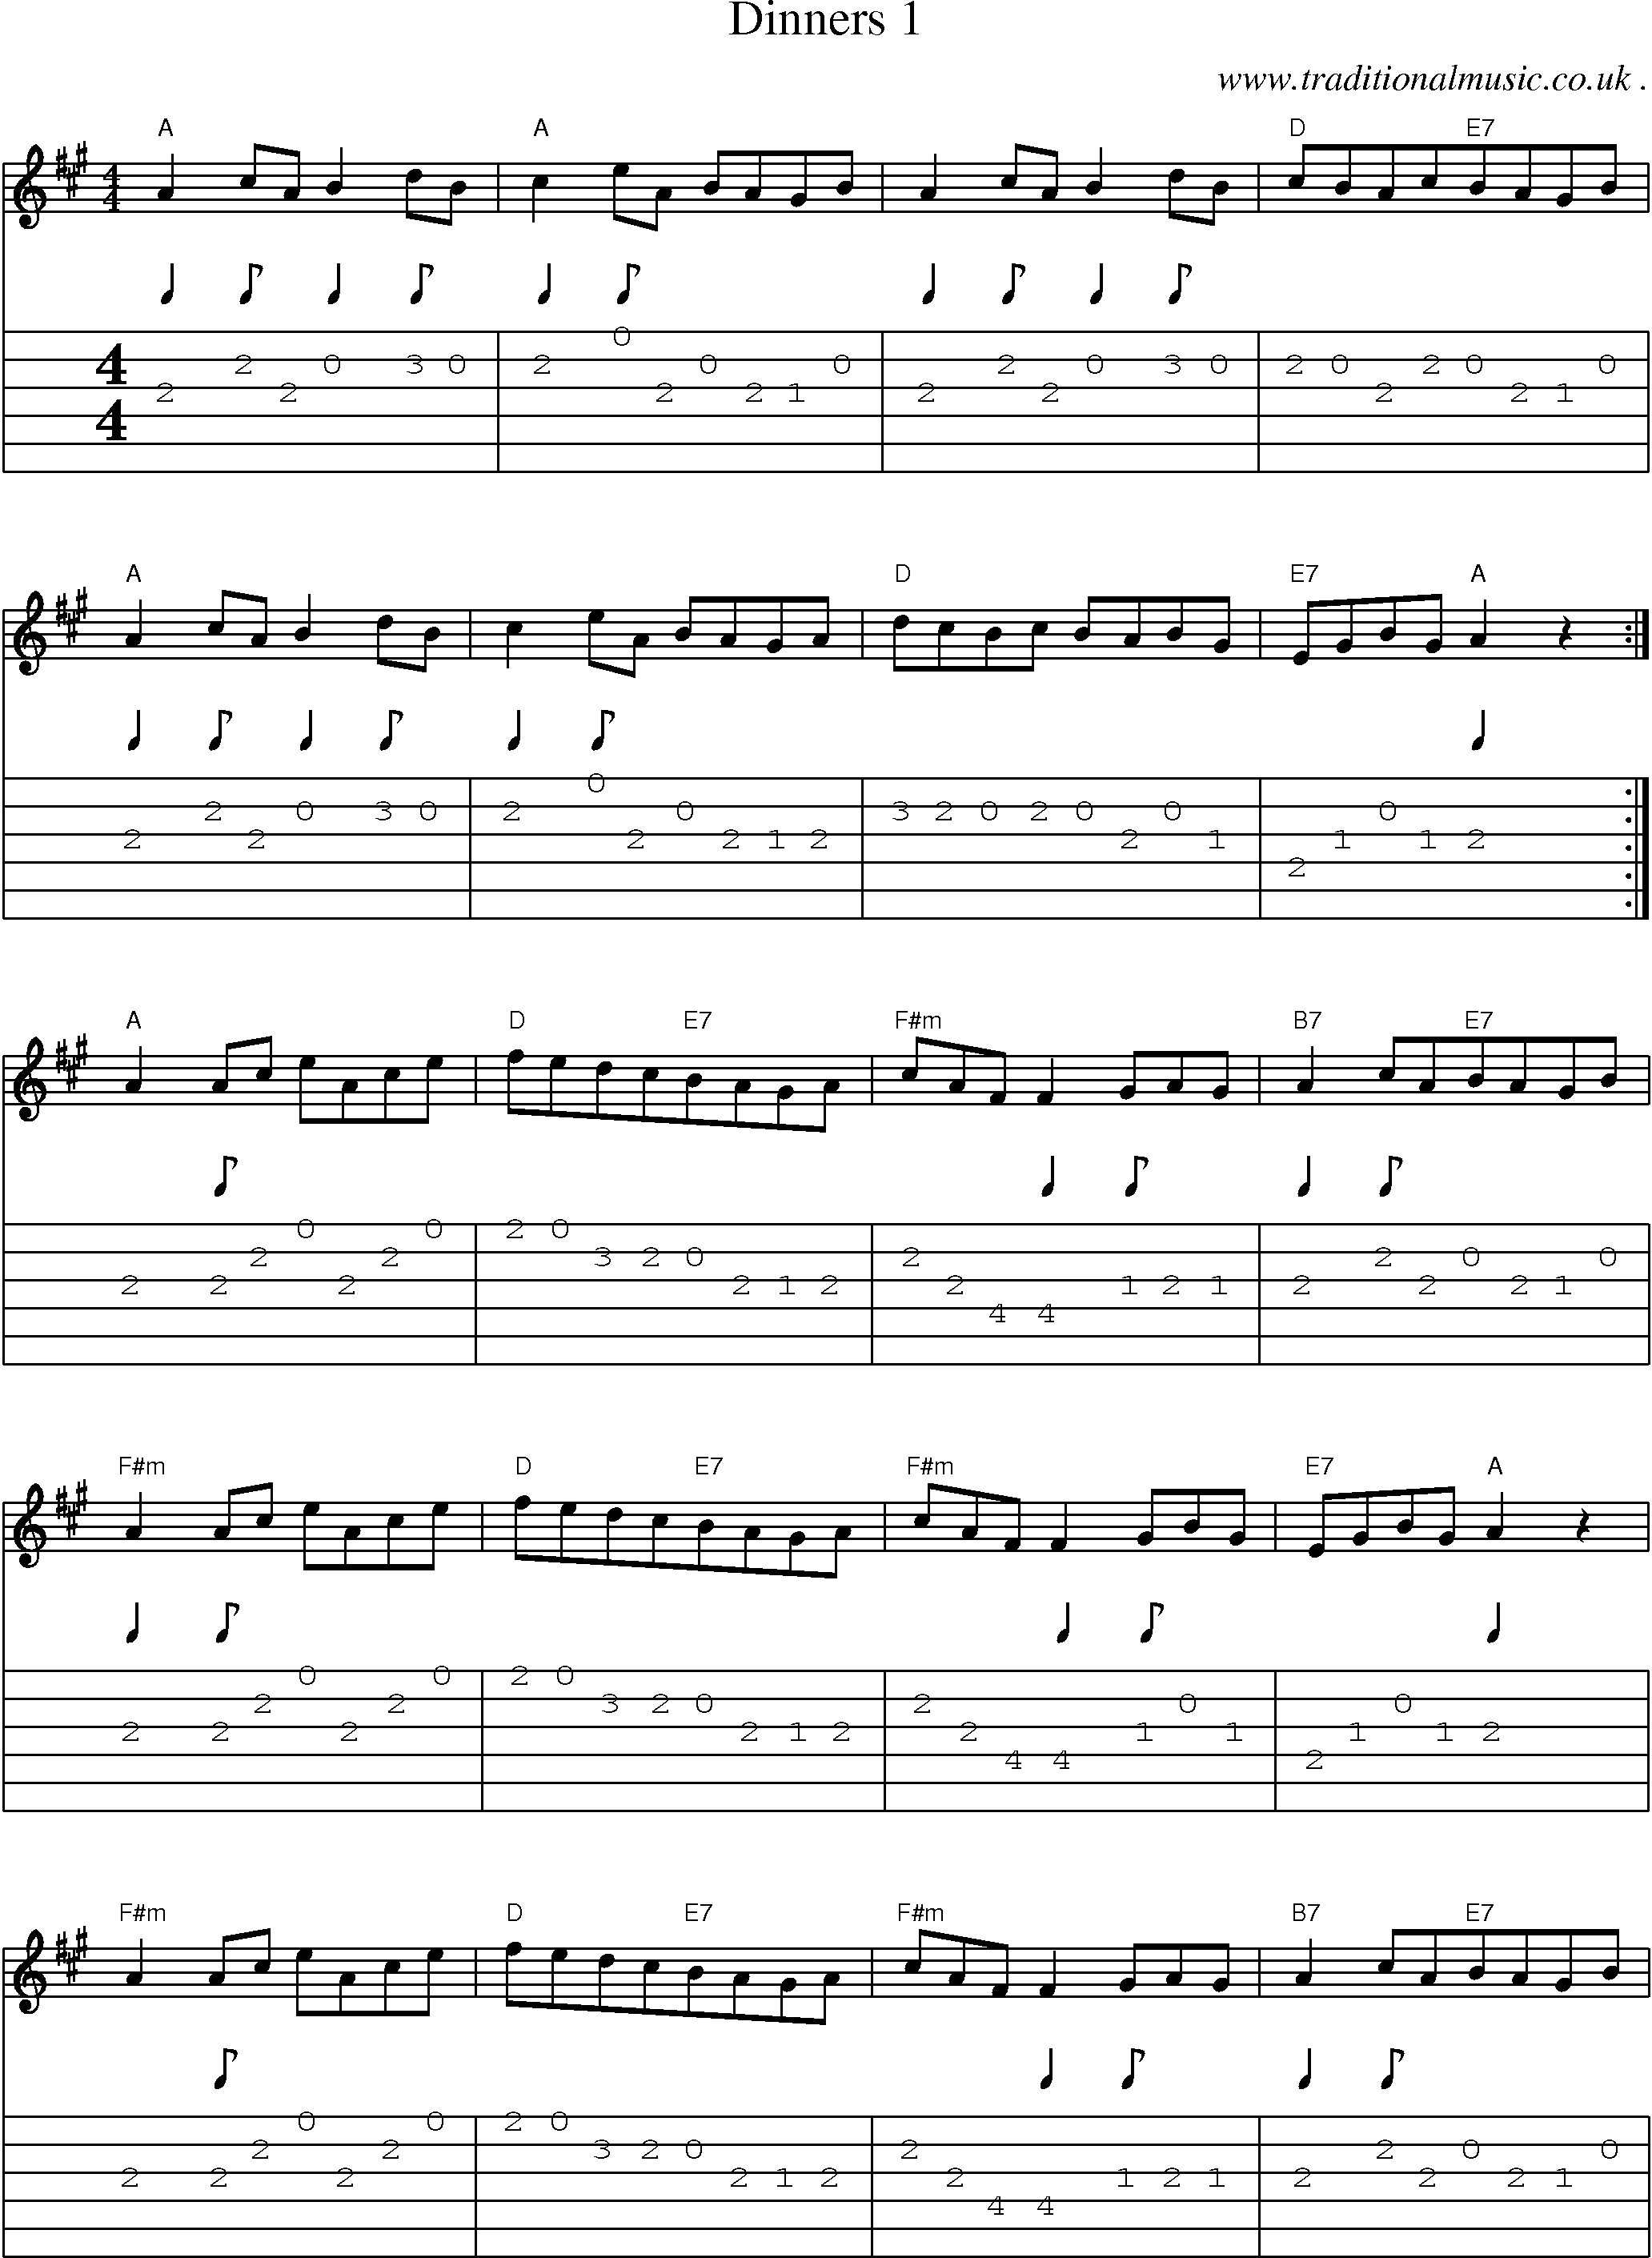 Sheet-Music and Guitar Tabs for Dinners 1